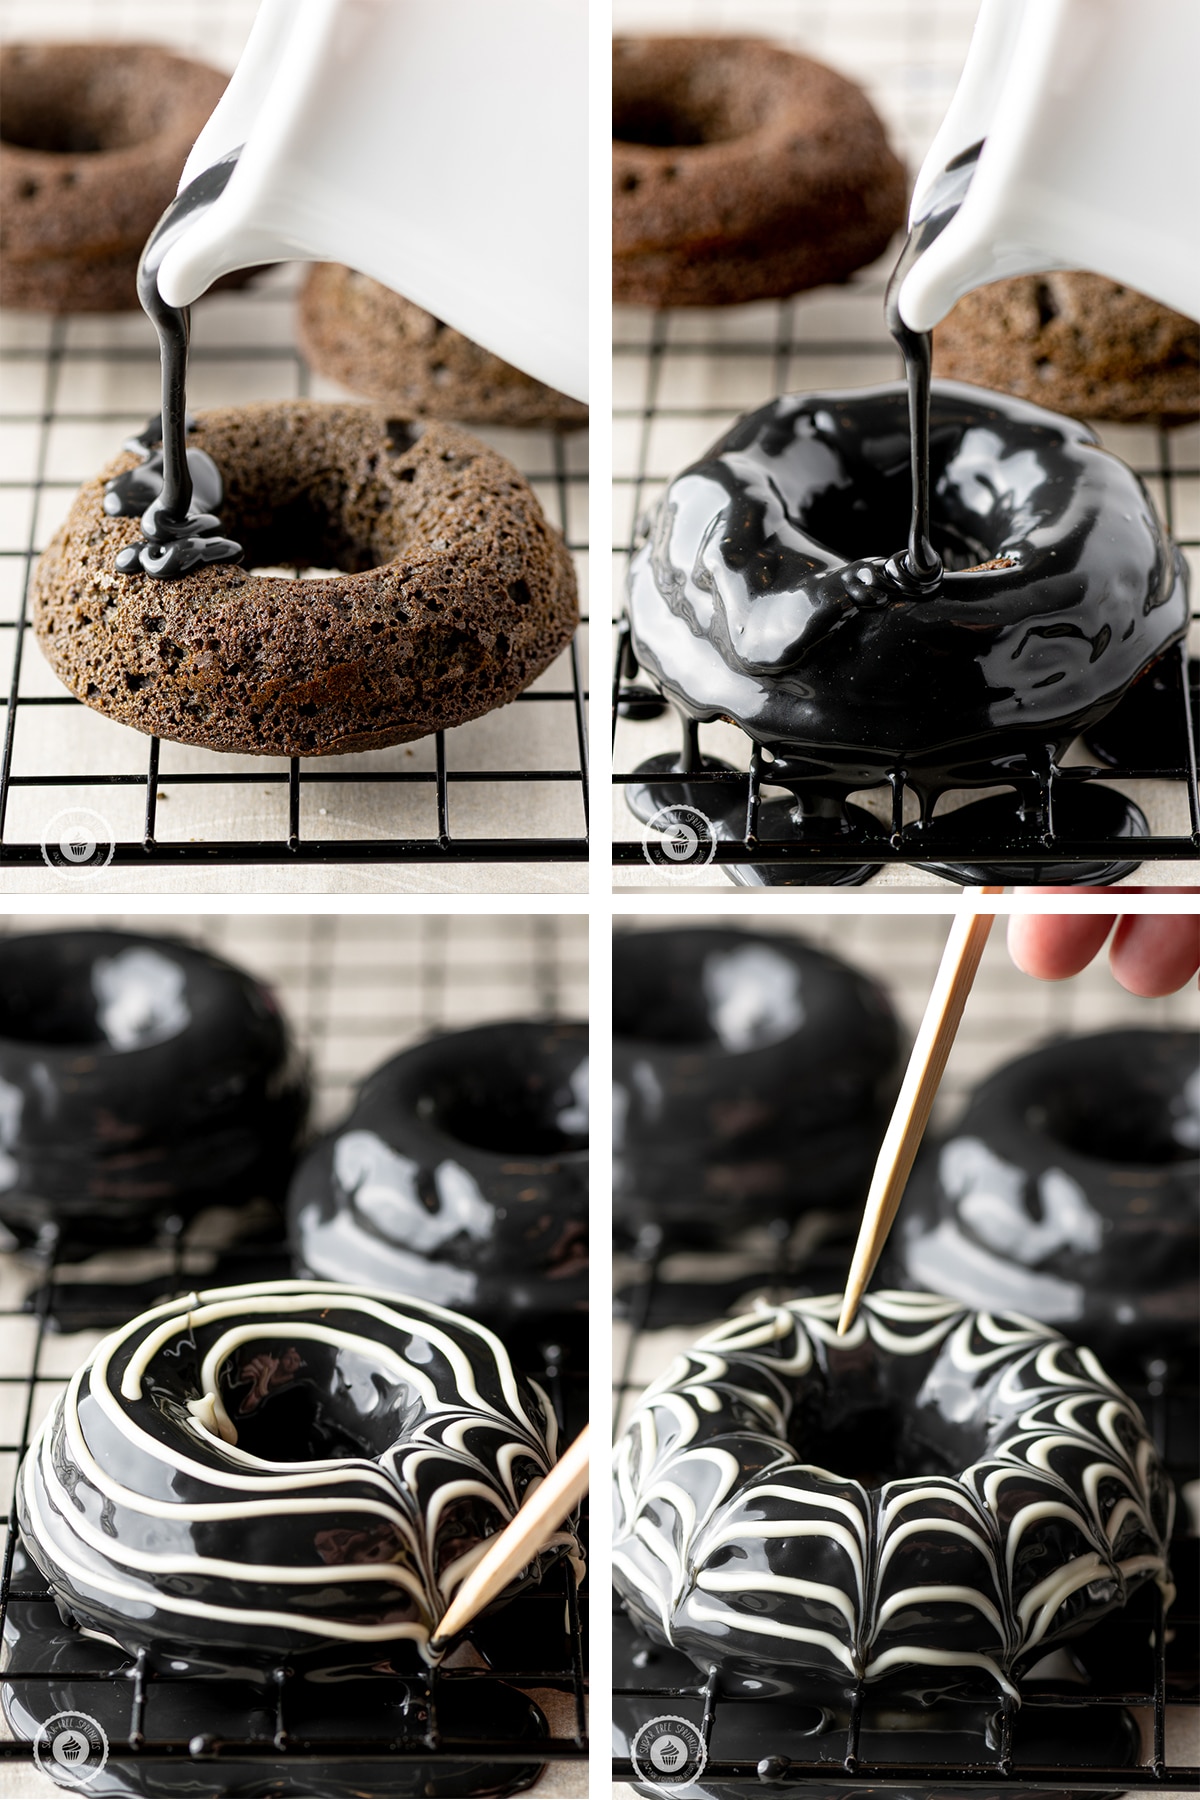 four panel image showing a chocolate donut being coated with black ganache  and white spiral spider web